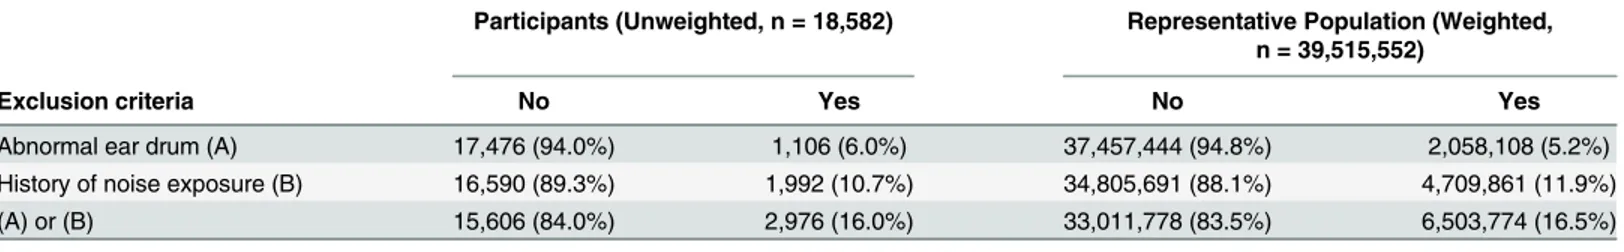 Table 1 shows the detailed exclusion procedures; 83.5% (weighted) of the representative popu- popu-lation were included in this study.